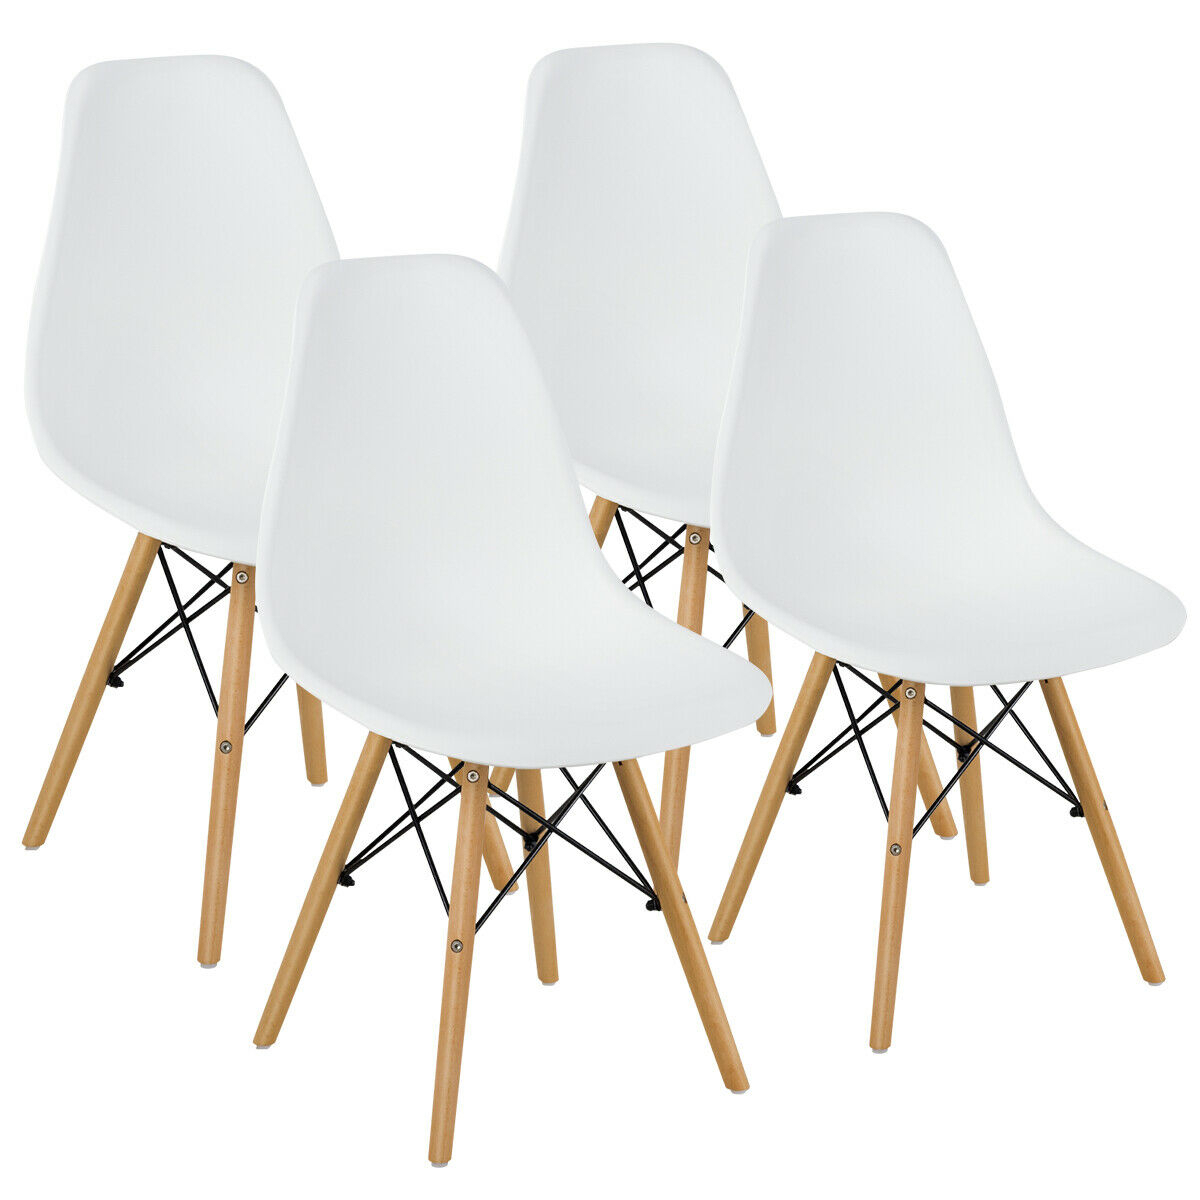 Set Of 4 Modern Dining Side Chair Armless Home Office W/ Wood Legs White